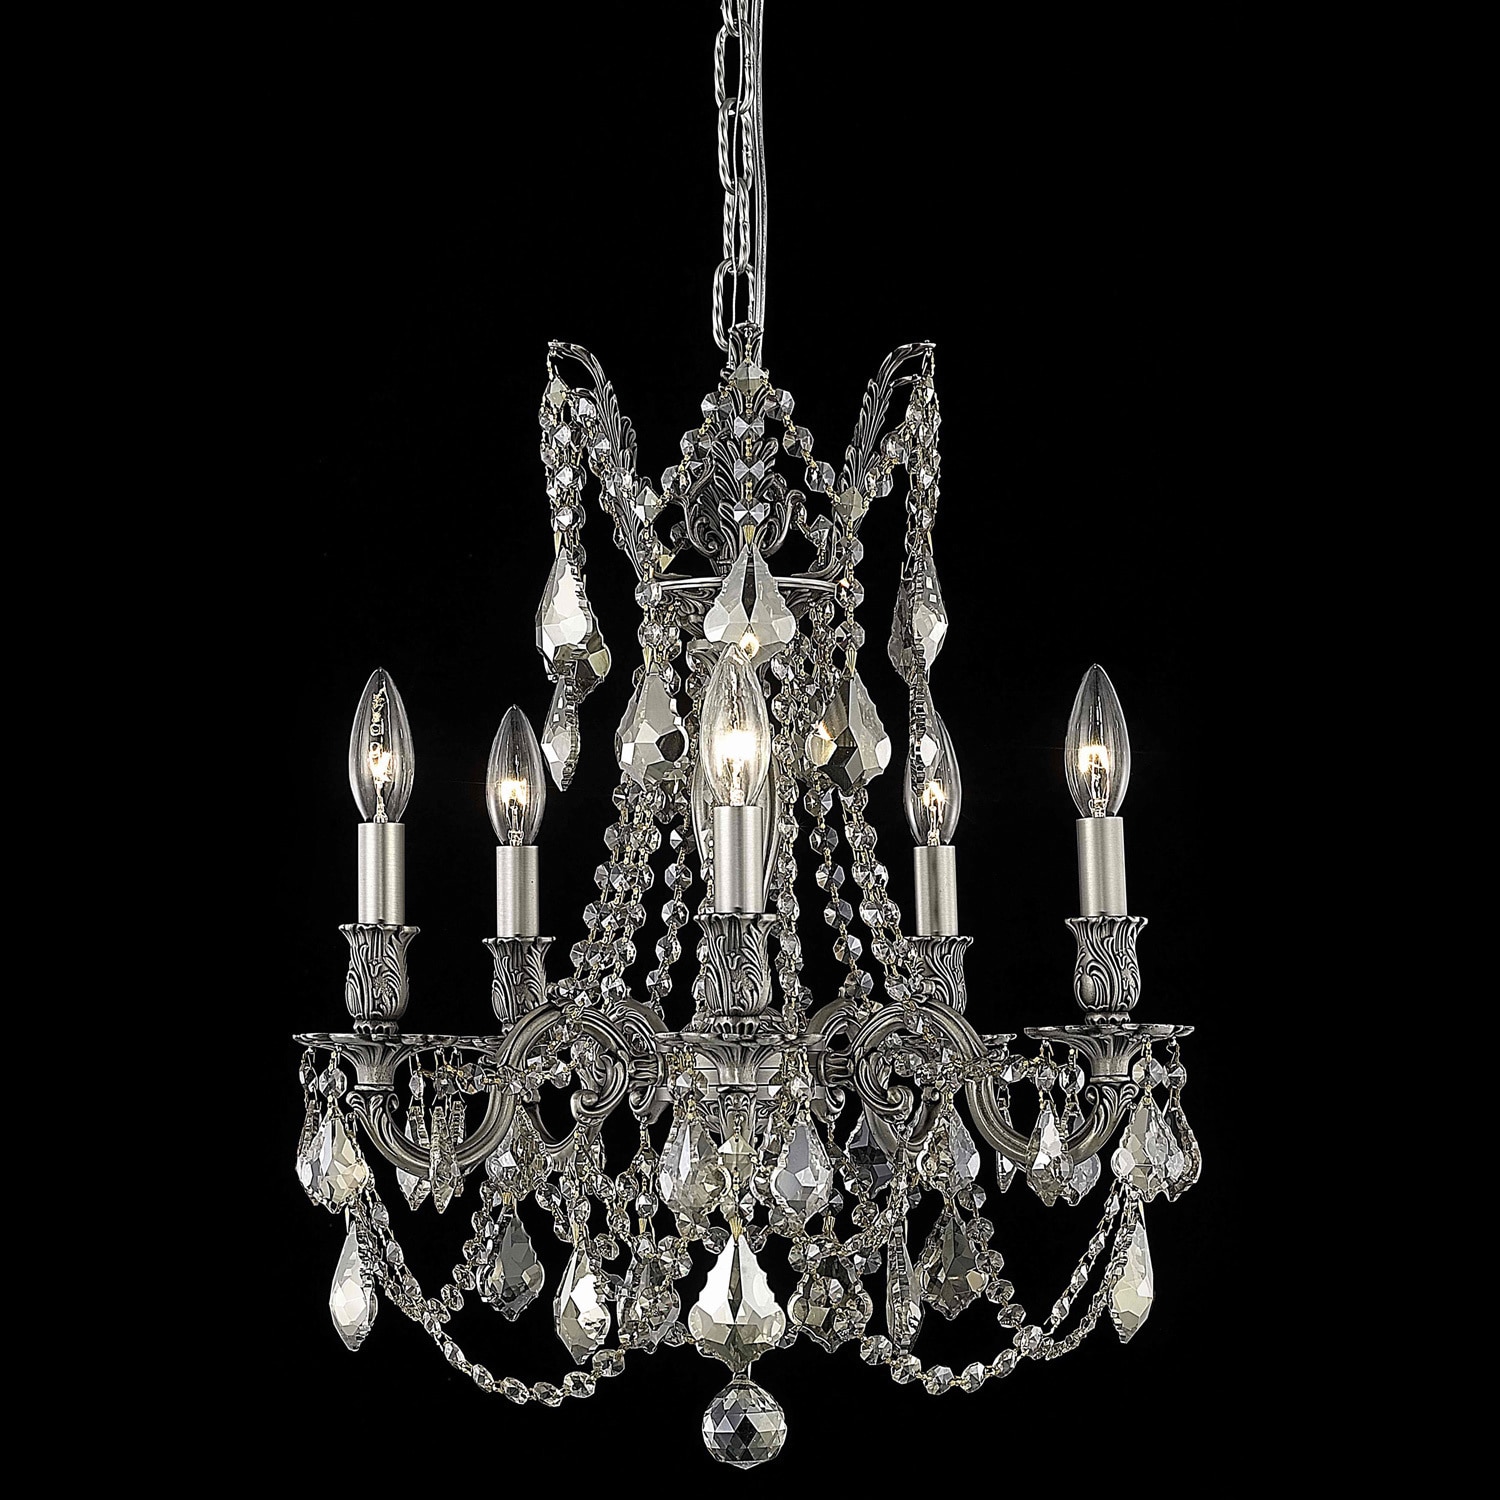 Christopher Knight Home Meilen 5 light Royal Cut Gold Crystal And Pewter Chandelier (Crystal and aluminumFinish PewterNumber of lights Five (5)Requires 60 watt max bulb (not included)Bulb type E12, 110V 125VIncludes 5 feet of chain/wireDimensions 18